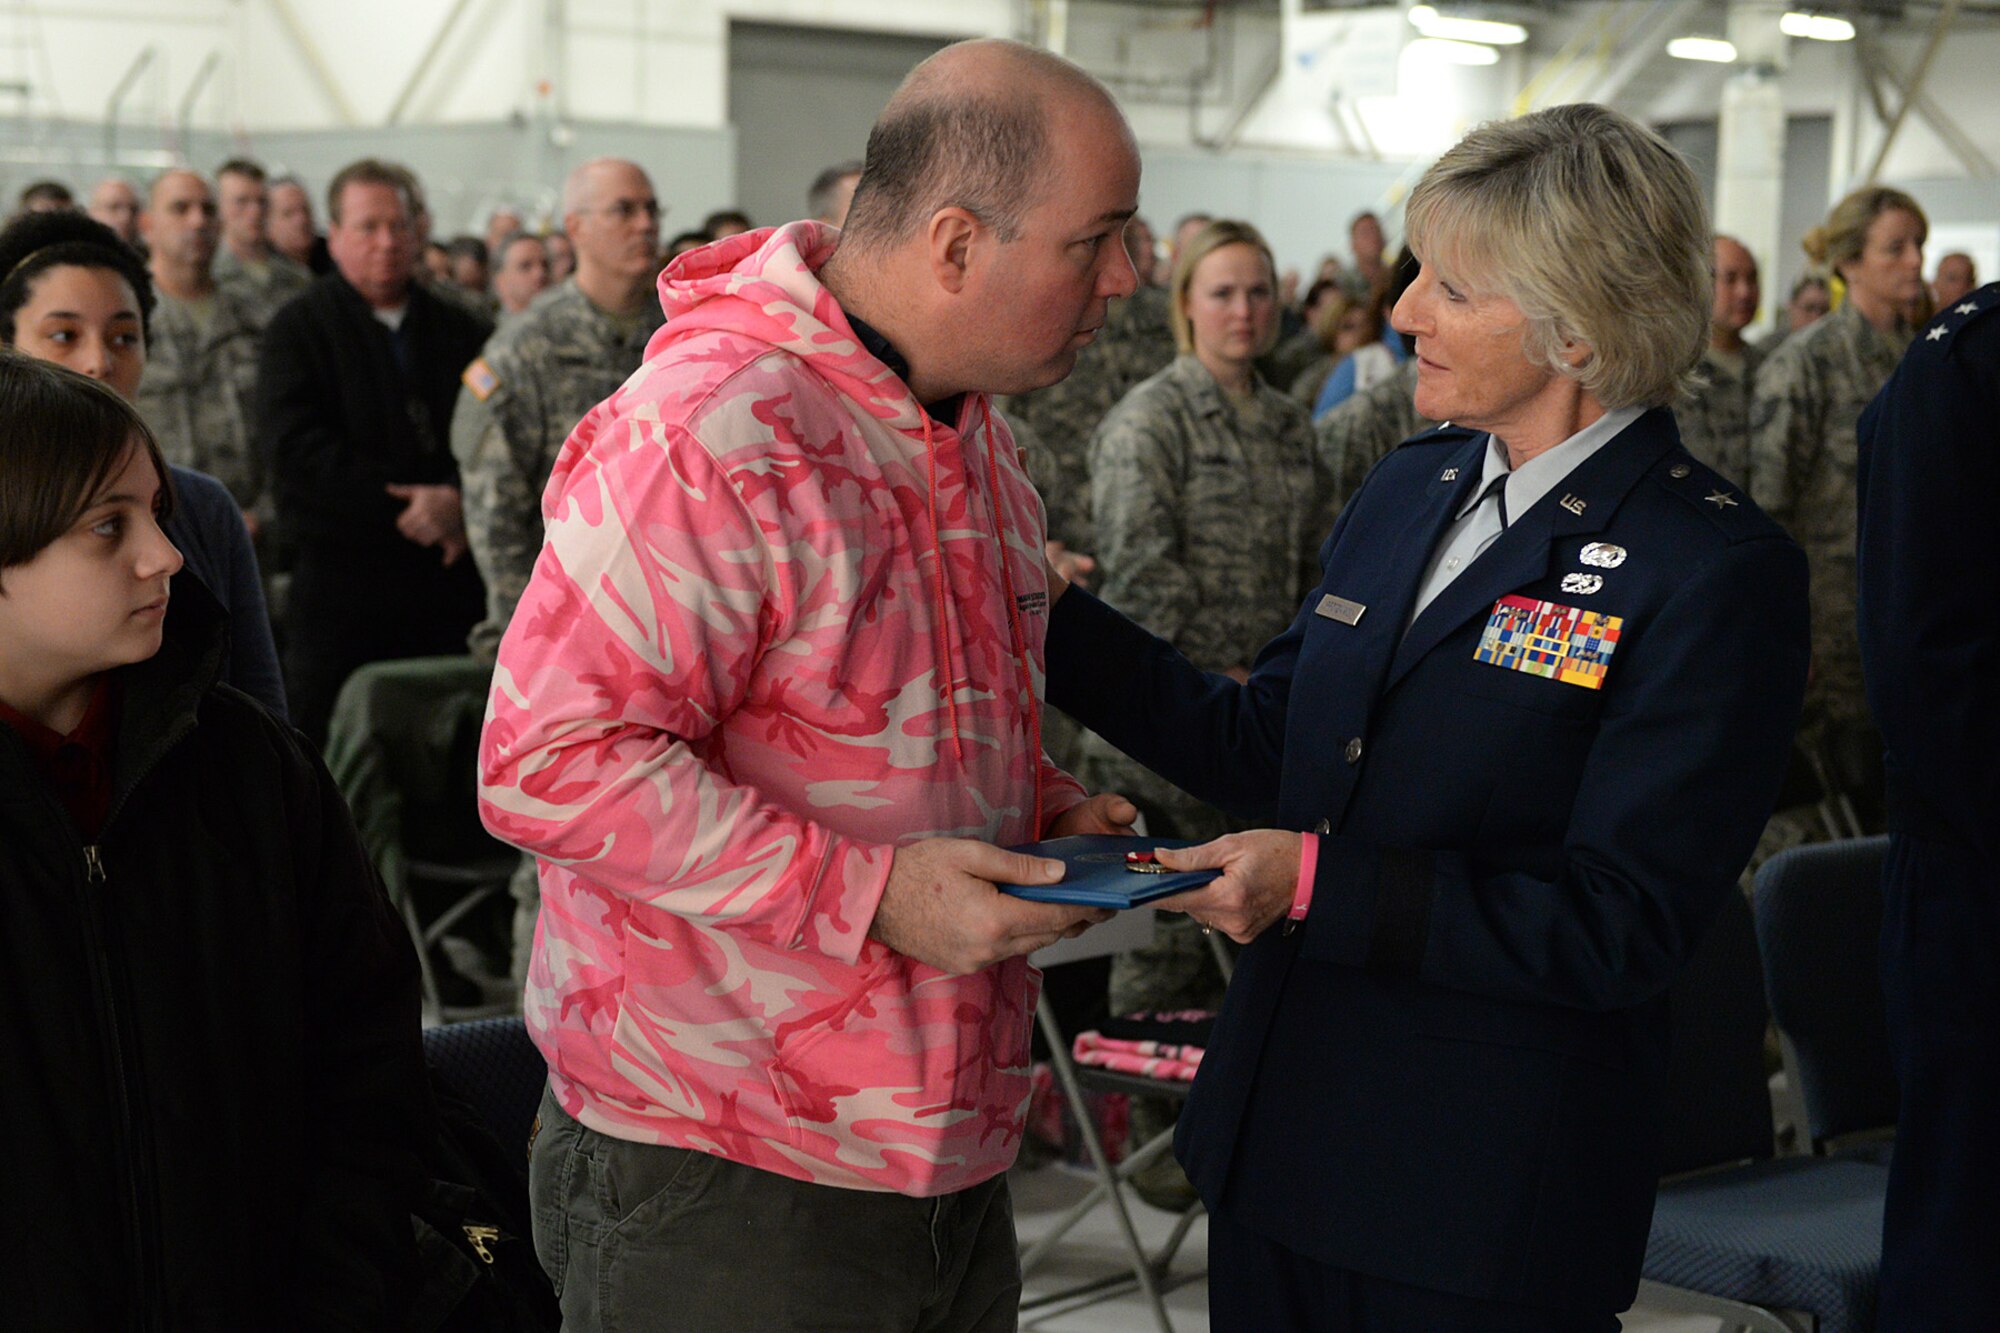 Brig. Gen. Carolyn J. Protzmann, N.H. Air National Guard commander, presents Shawn Riley the Legion of Merit Medal during a posthumous retirement ceremony for his wife, Lt. Col. Stephanie Riley, in Hangar 254, Jan. 10. Riley, who passed away Dec. 29 at the age of 47, was an occupational health nurse for the N.H. National Guard assigned to Joint Force Headquarters in Concord. (U.S. Air National Guard photo by Tech. Sgt. Mark Wyatt)